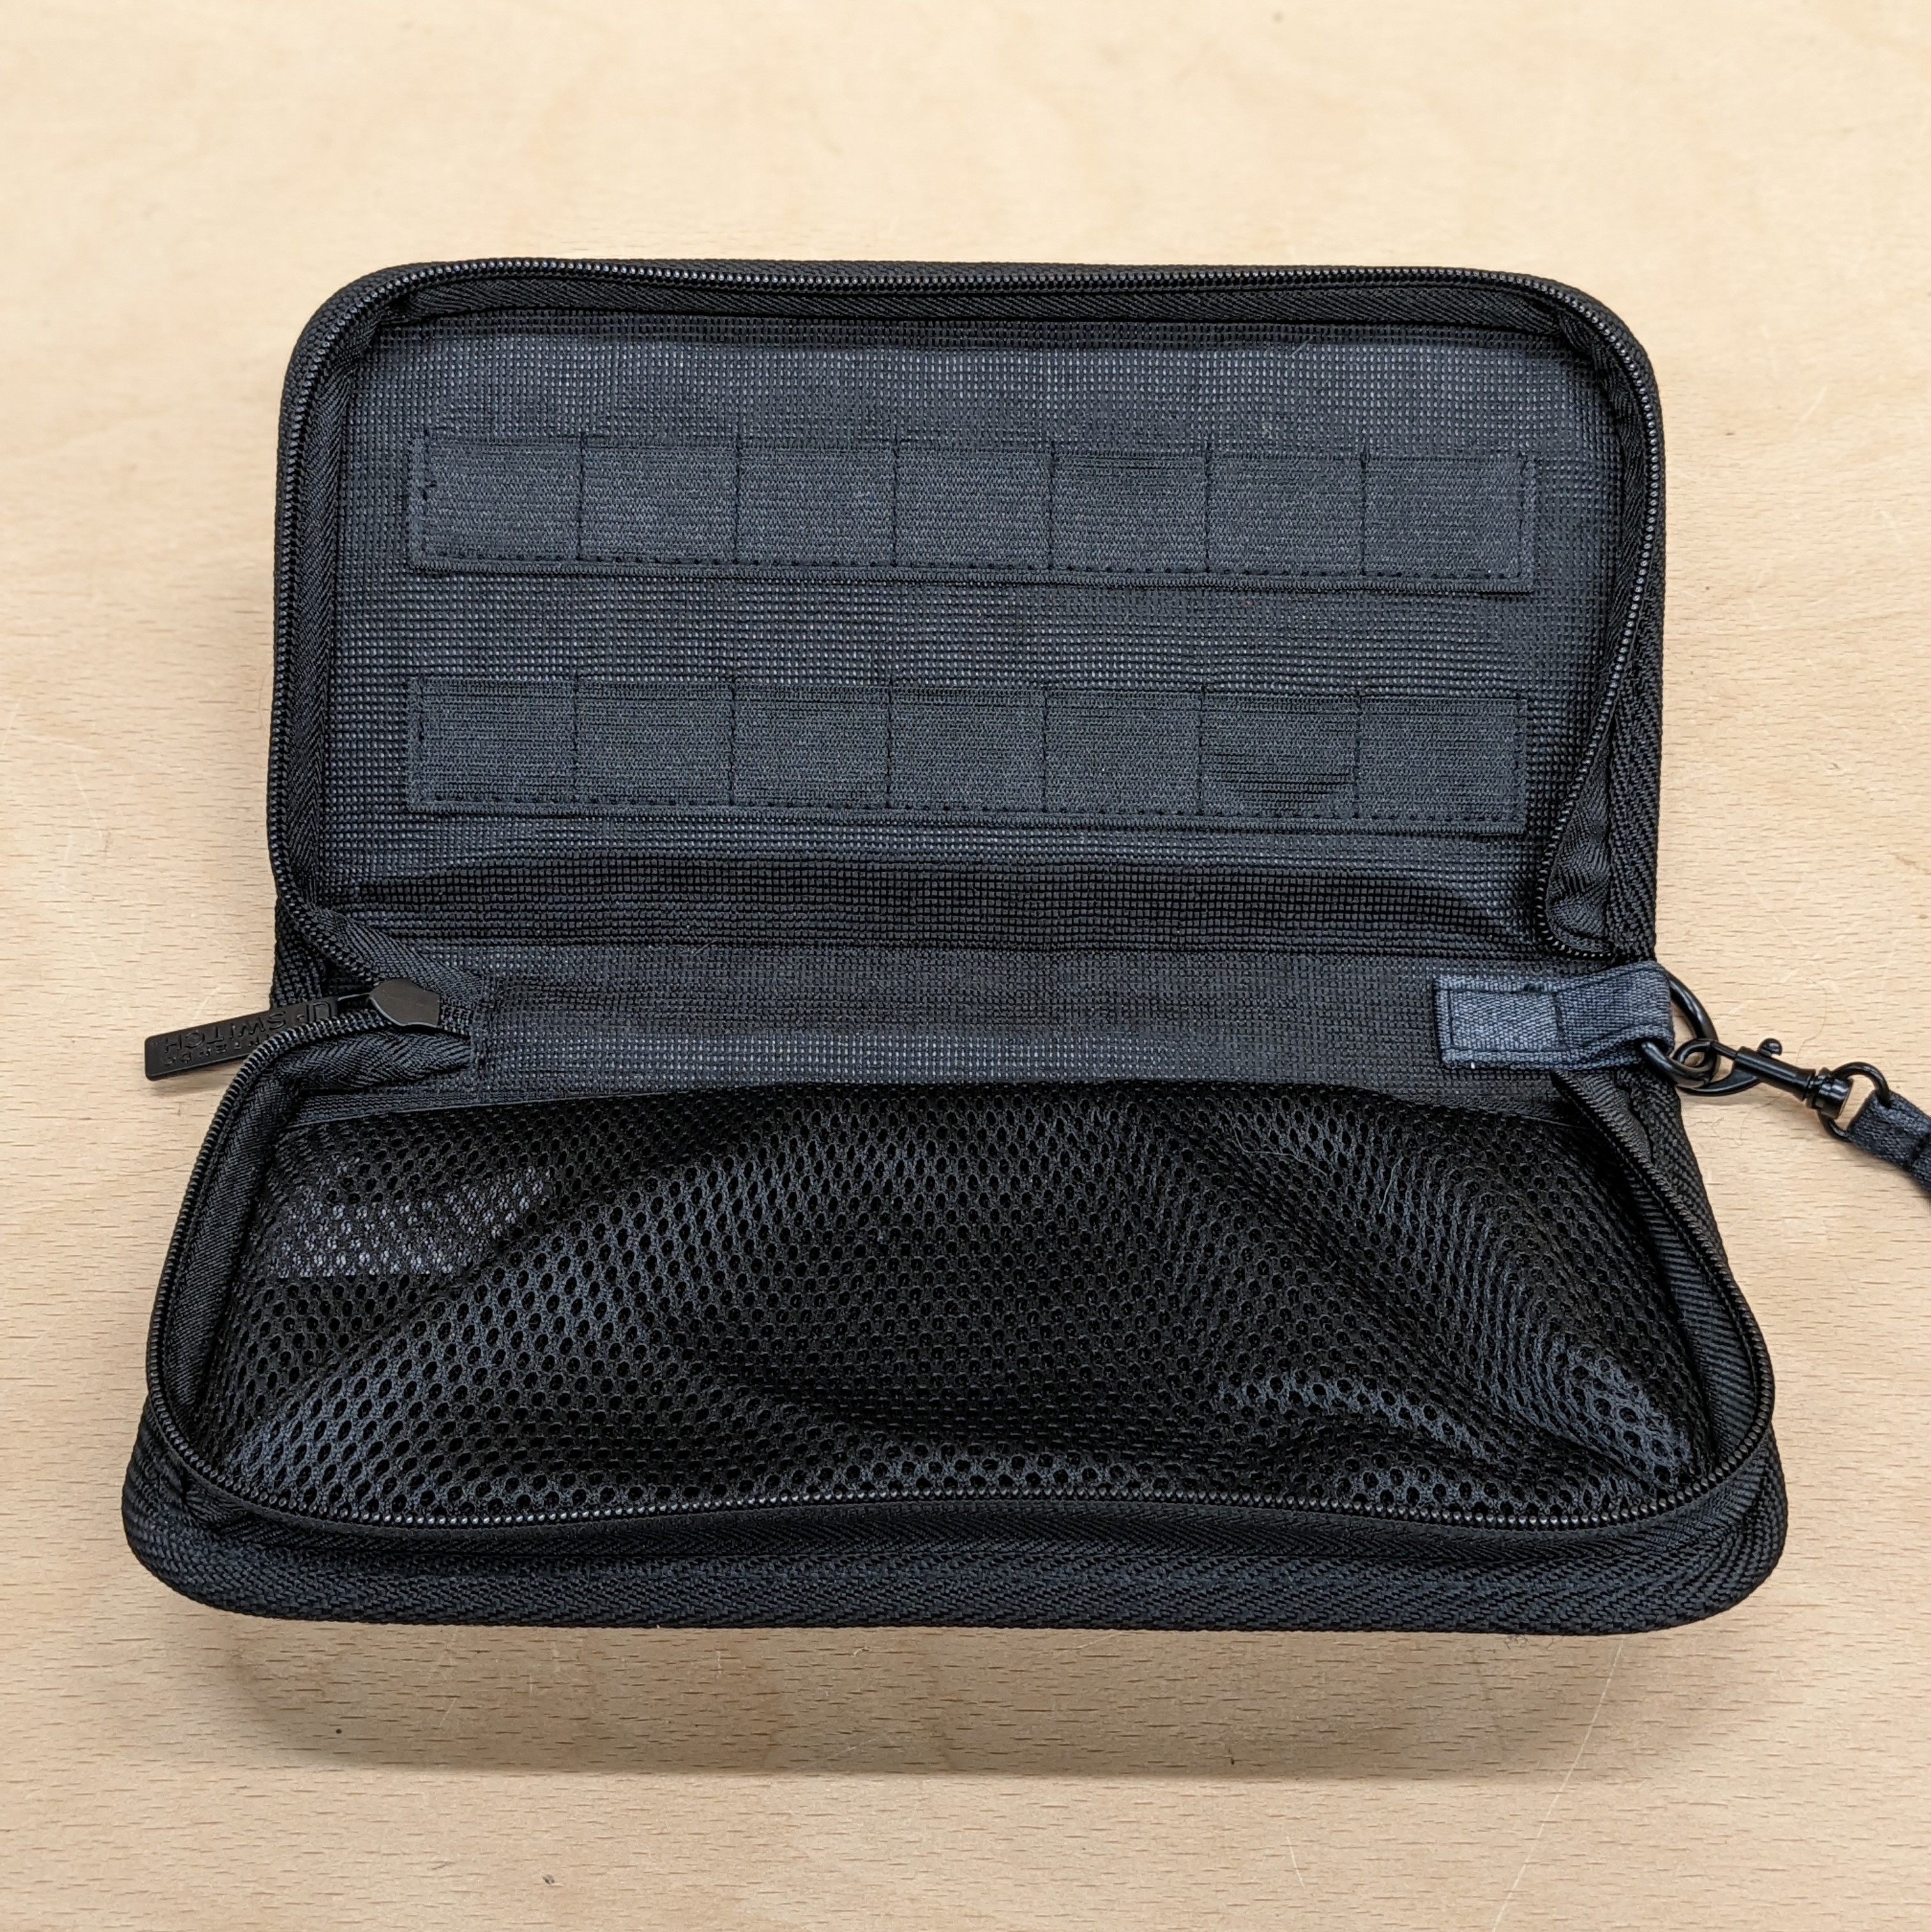 Nintendo switch official grey carry case inside slots of cartridges and console pouch